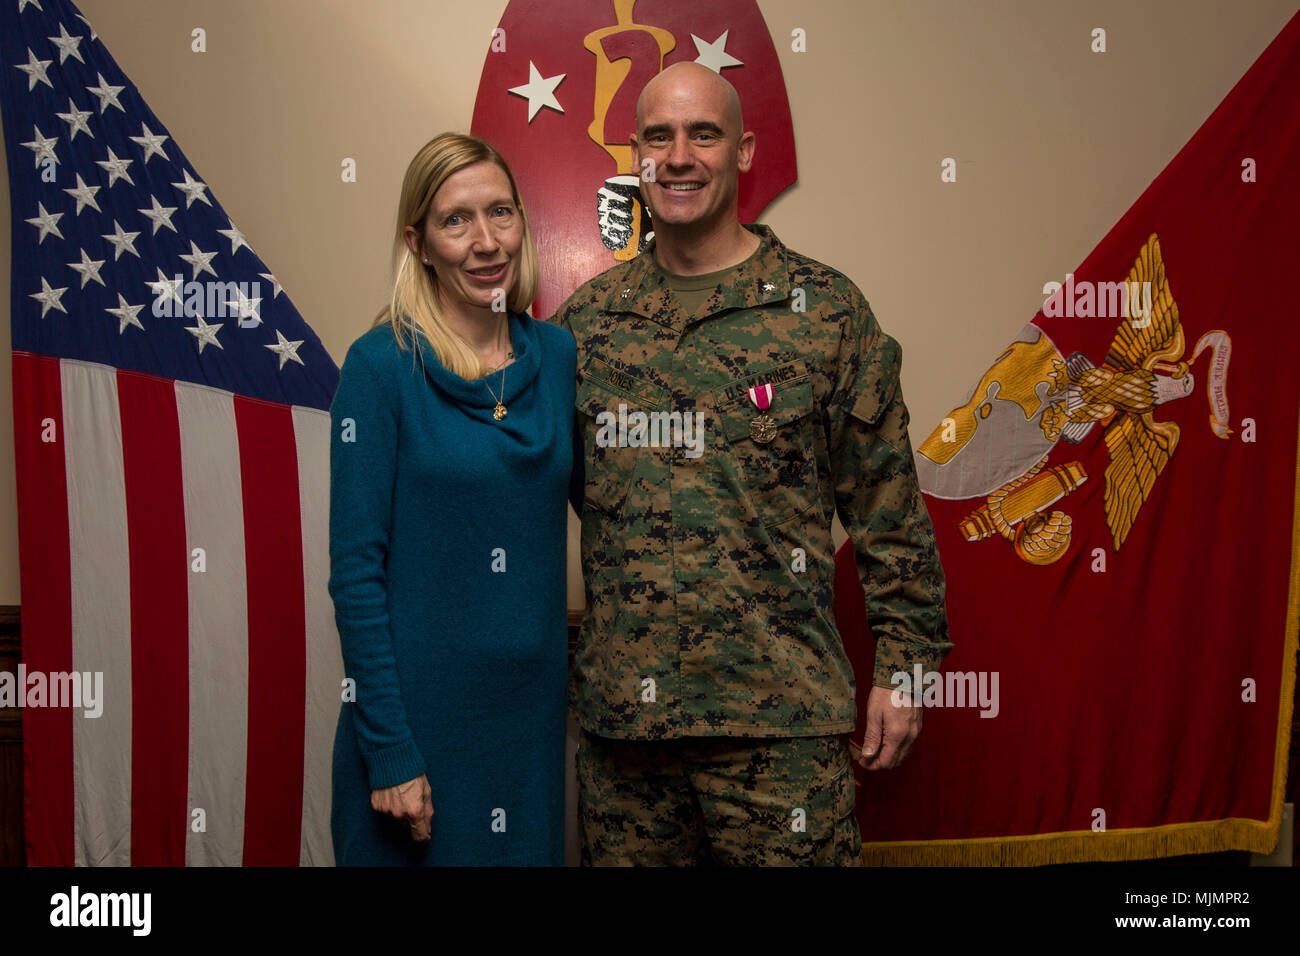 U.S. Marine Corps Lt. Col. Kemper A. Jones poses with his wife following his award ceremony on Camp Lejeune, N.C., Dec. 7, 2017. Jones was awarded the Meritorious Service Medal by Maj. Gen. John K. Love, commanding general, 2nd Marine Division (2d MARDIV). (U.S. Marine Corps photo by Lance Cpl. Taylor N. Cooper) Stock Photo